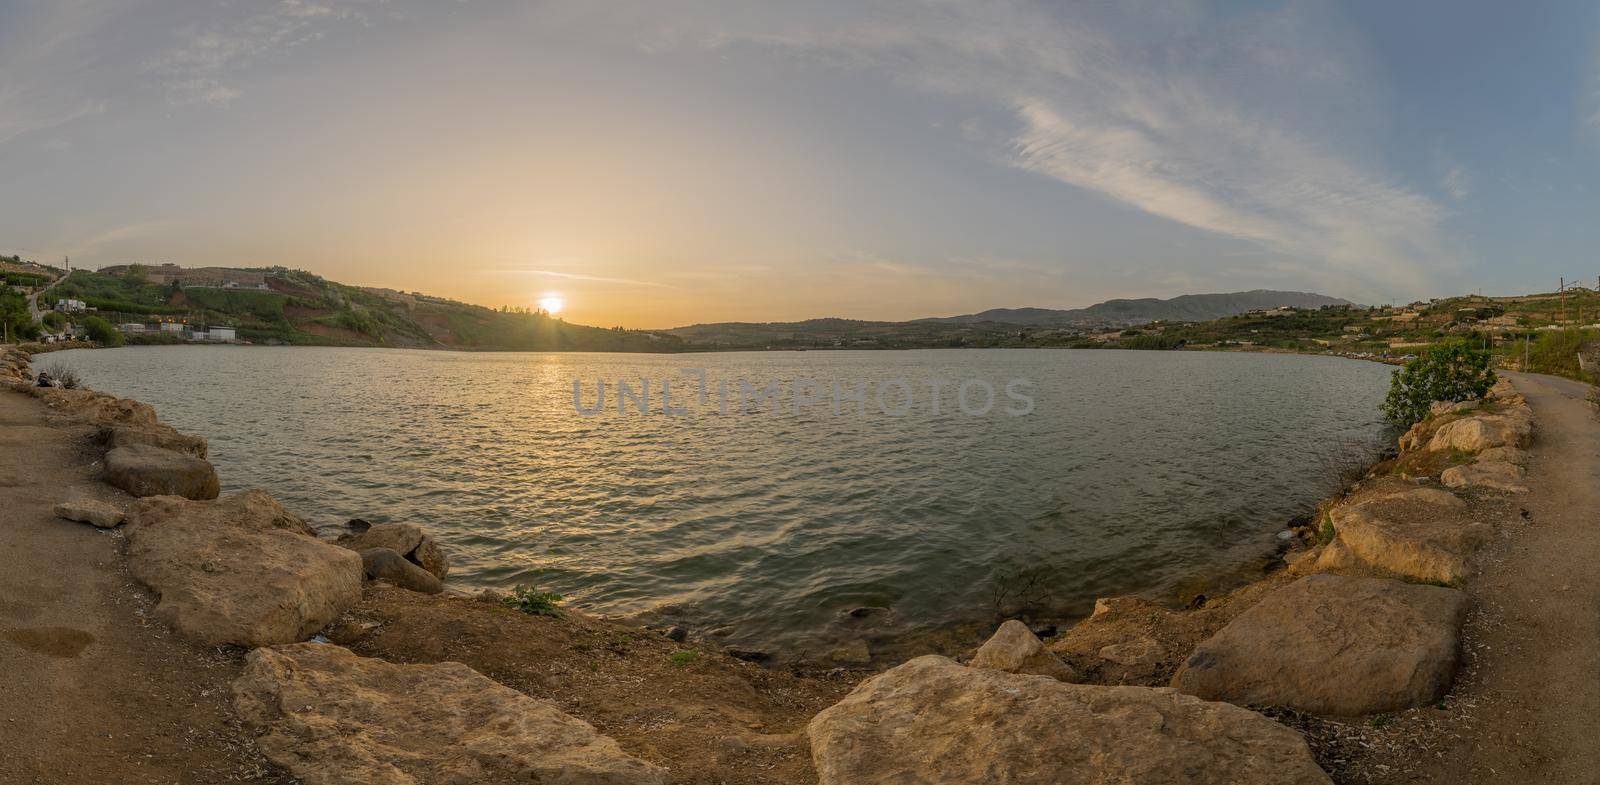 Panoramic sunset view of Lake Ram (Ram Pool) in the Golan Heights, Northern Israel